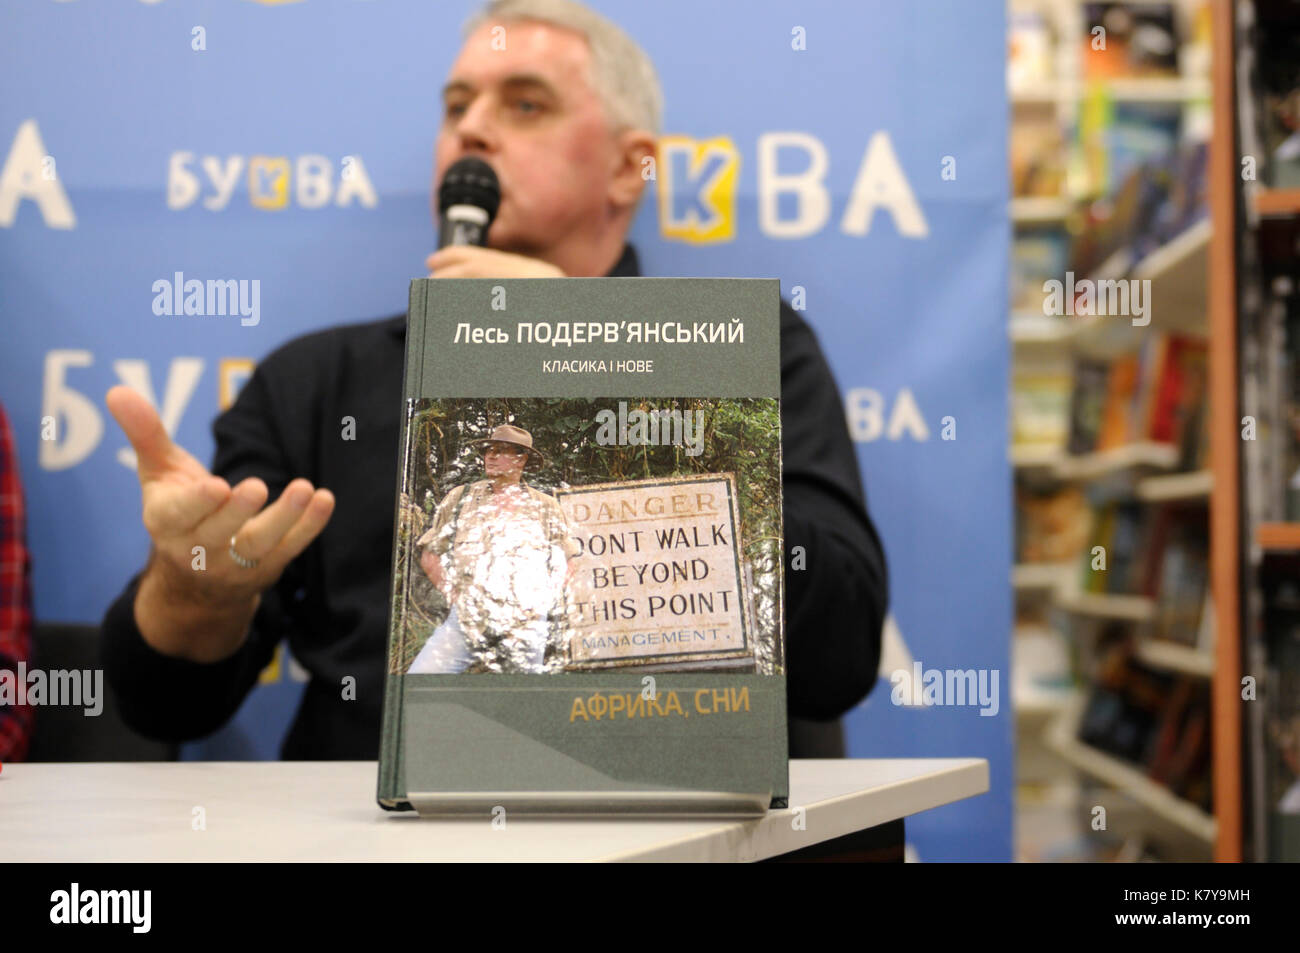 Les Podervianskyi, a Ukrainian painter, poet, playwright and performer, communicating with fans. A Bukva book-store. February 18, 2016. Kyiv, Ukraine Stock Photo